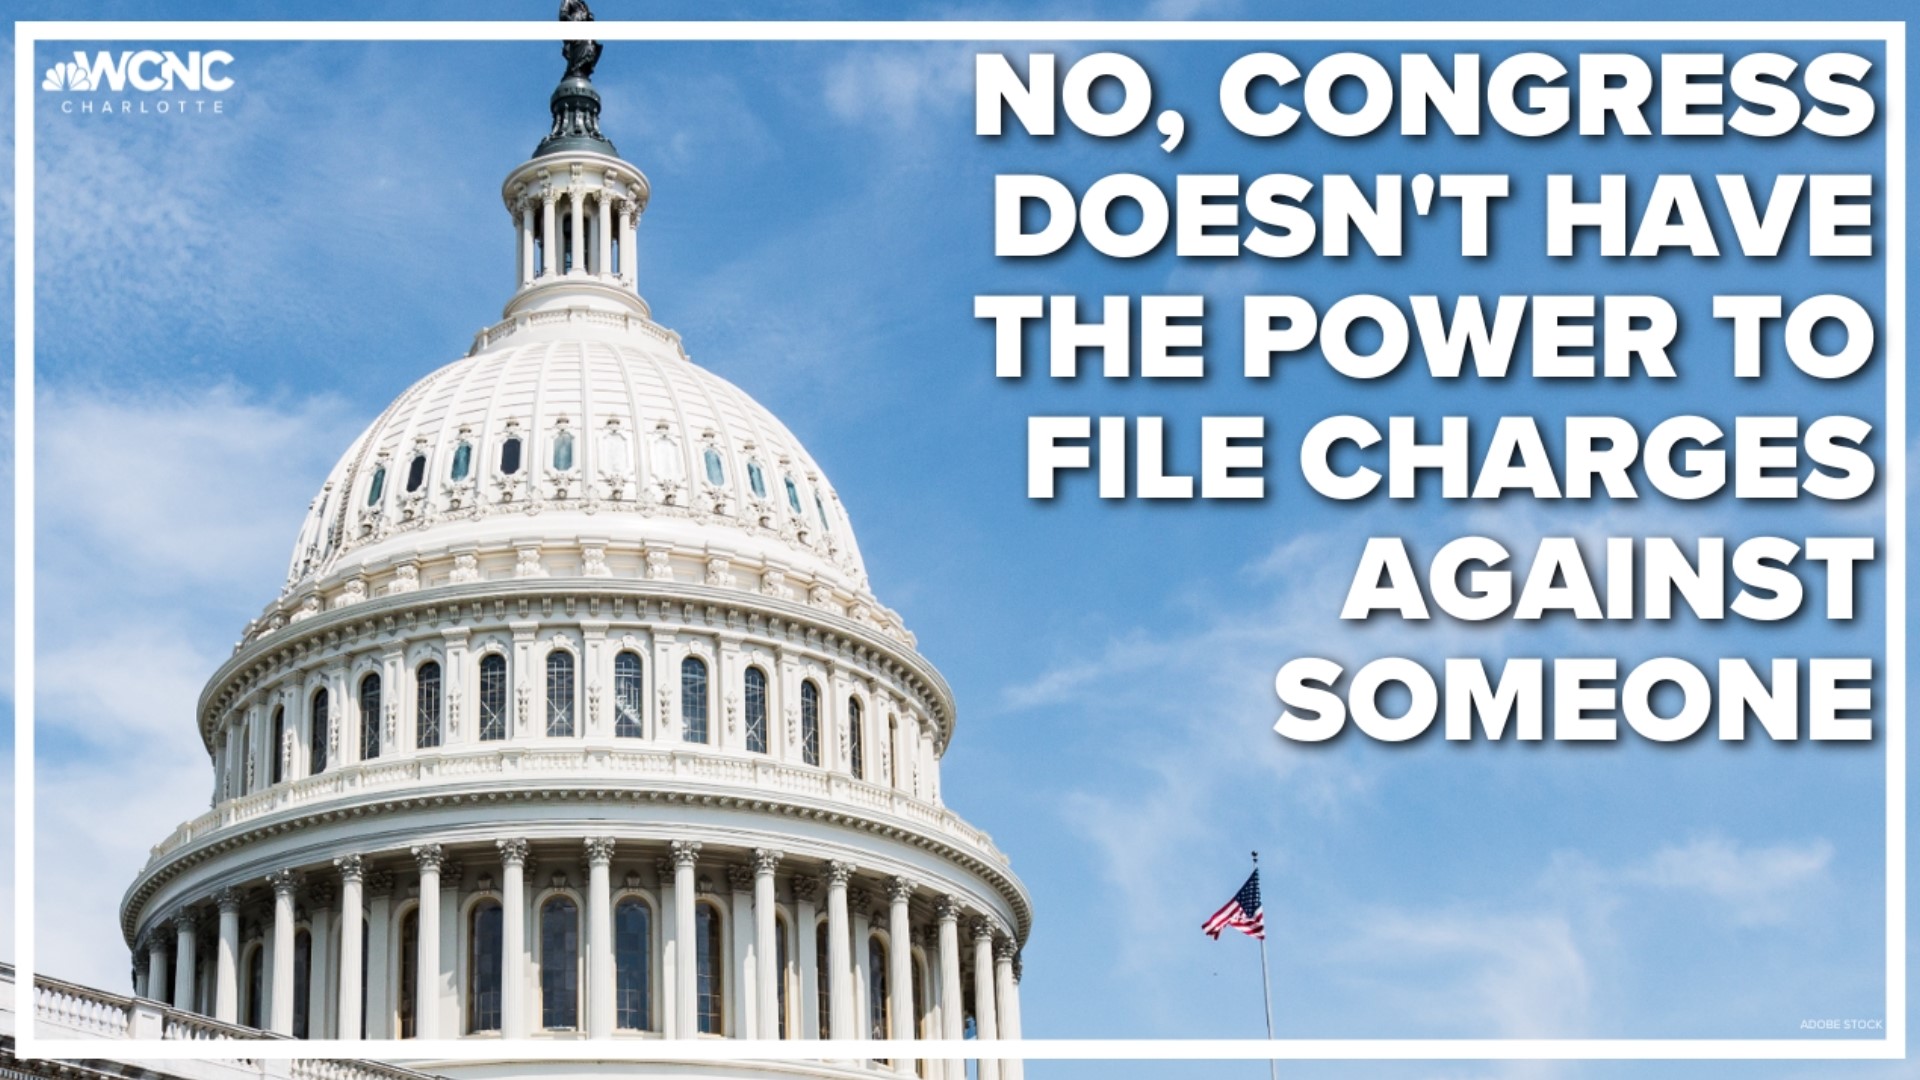 The U.S. Constitution doesn't say anything about congressional investigations and oversight. It does state Congress has "all legislative powers."